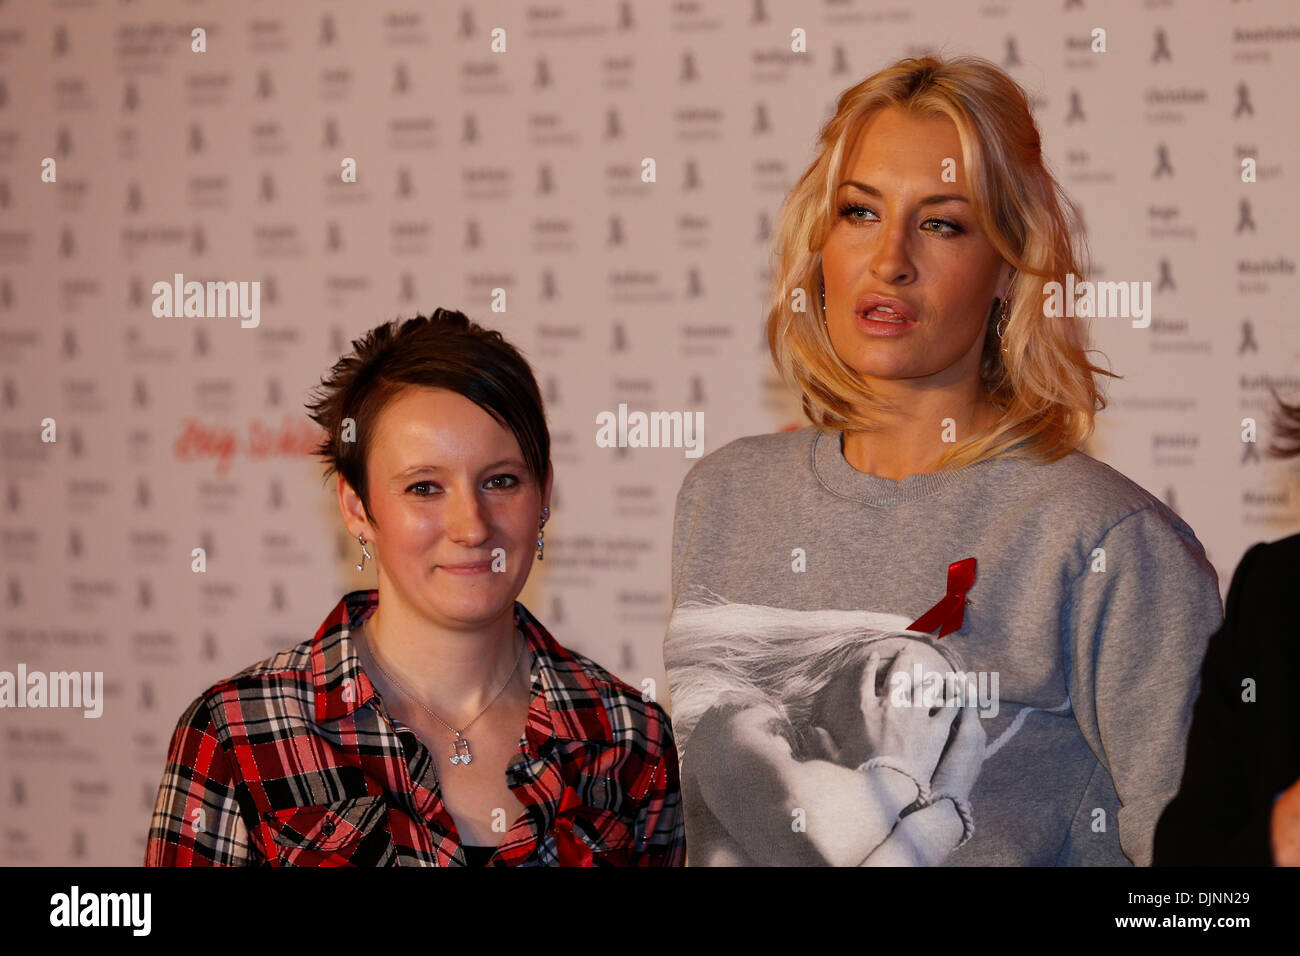 Berlin, Germany. November 29th, 2013. Press conference with German star singer Sarah Connor on 'Live together positively' on the occasion of the World AIDS Day at the admiral palace in Berlin. / Picture: Sarah Connor, Star singer and ambassador of the 'live together positively' and Doreen, HIV-positive ambassador for the action. Credit:  Reynaldo Chaib Paganelli/Alamy Live News Stock Photo